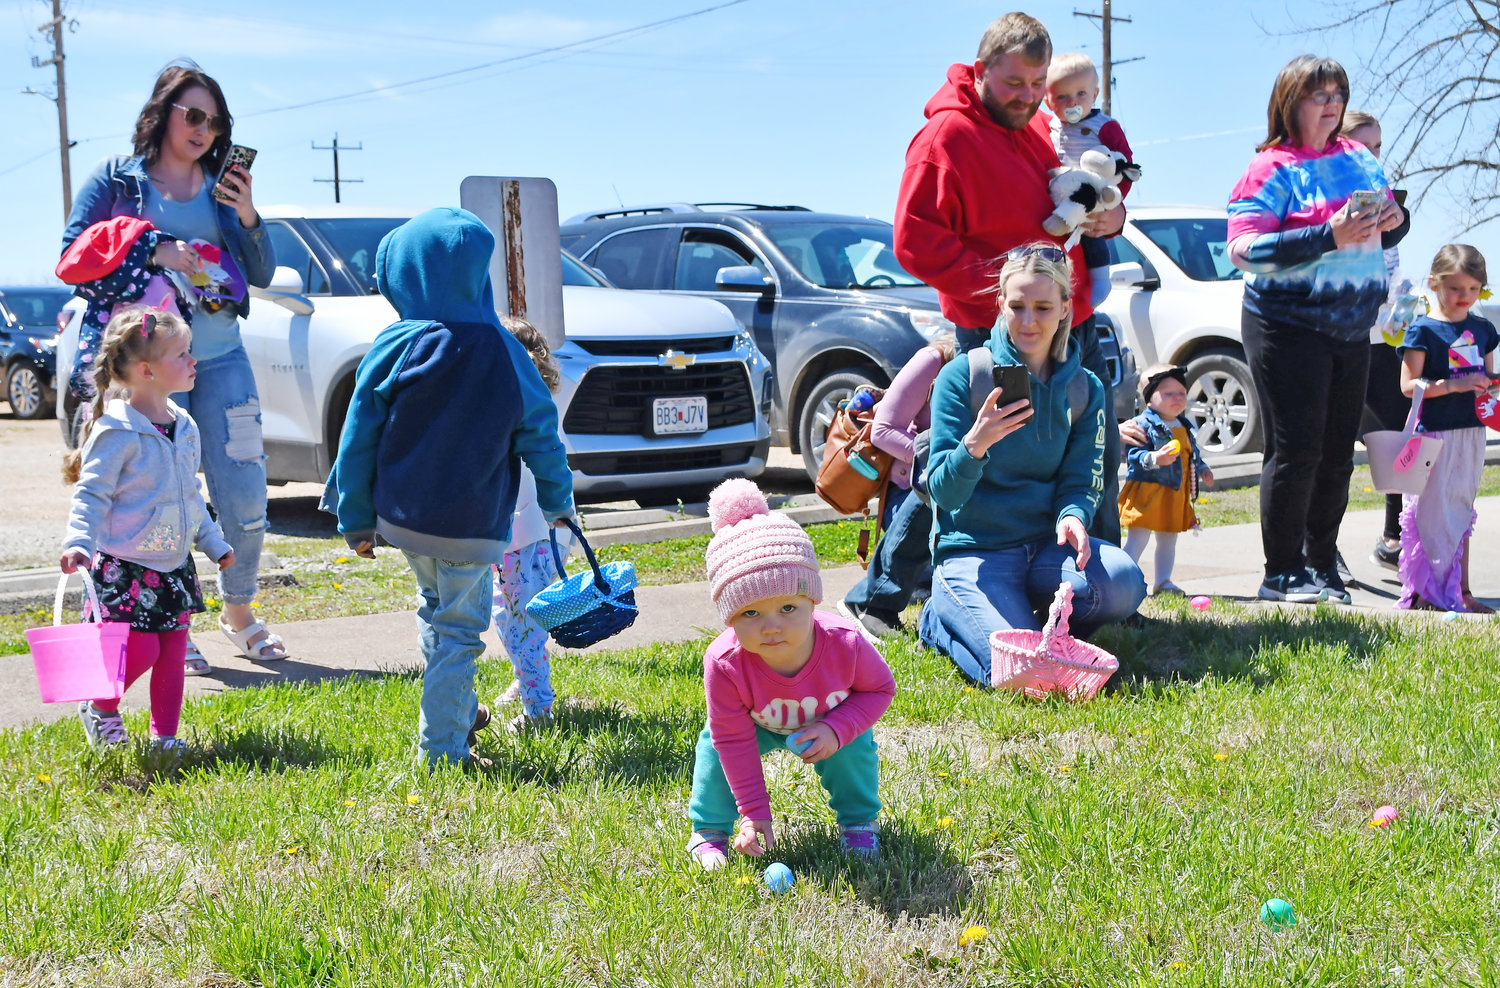 The Vienna egg hunt was hosted by the Vienna United Methodist Church.